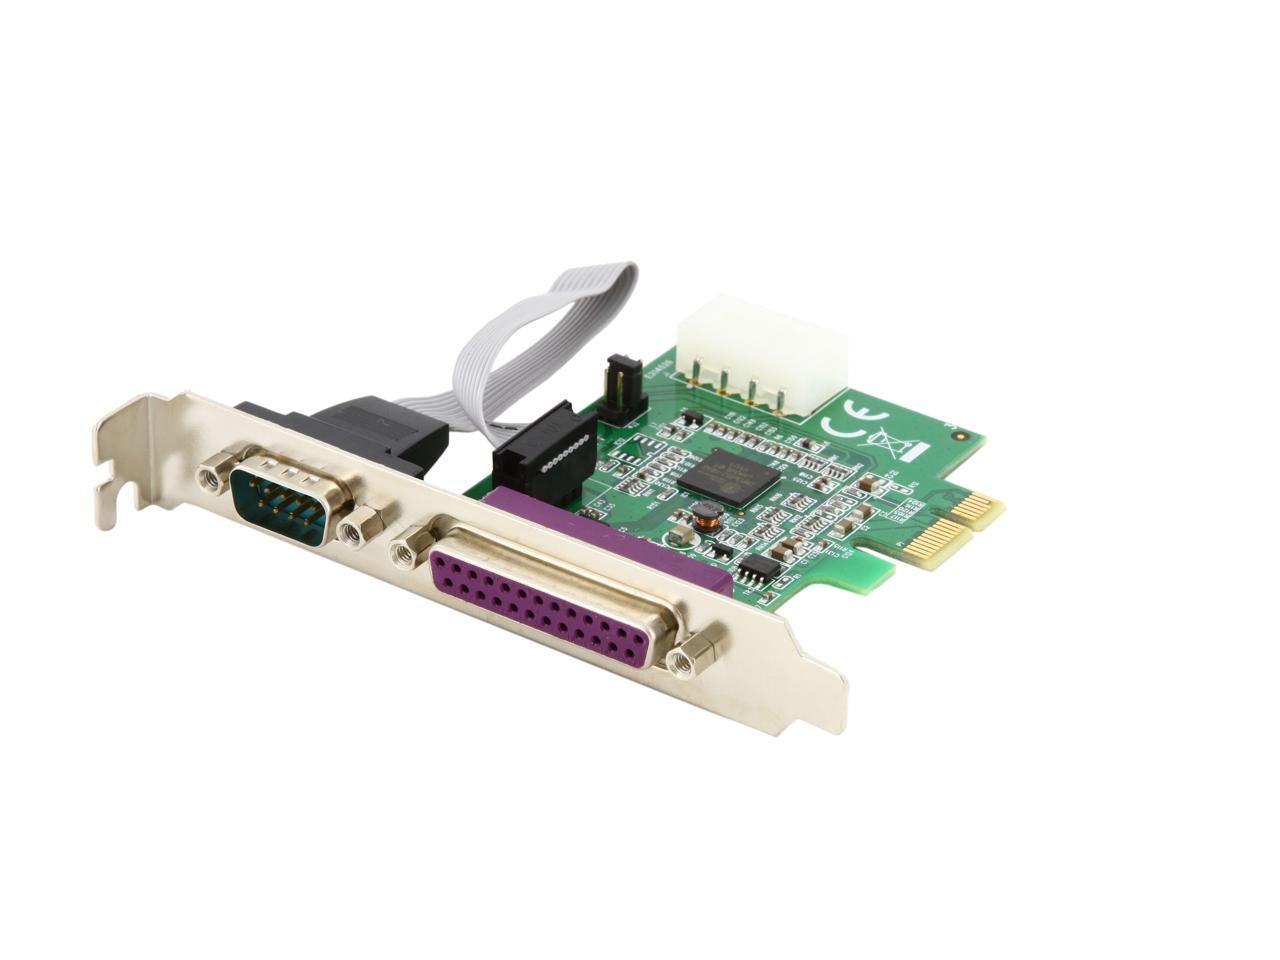 PEX1S1P952 StarTech.com 1S1P Native PCI Express Parallel Serial Combo Card with 16950 UART